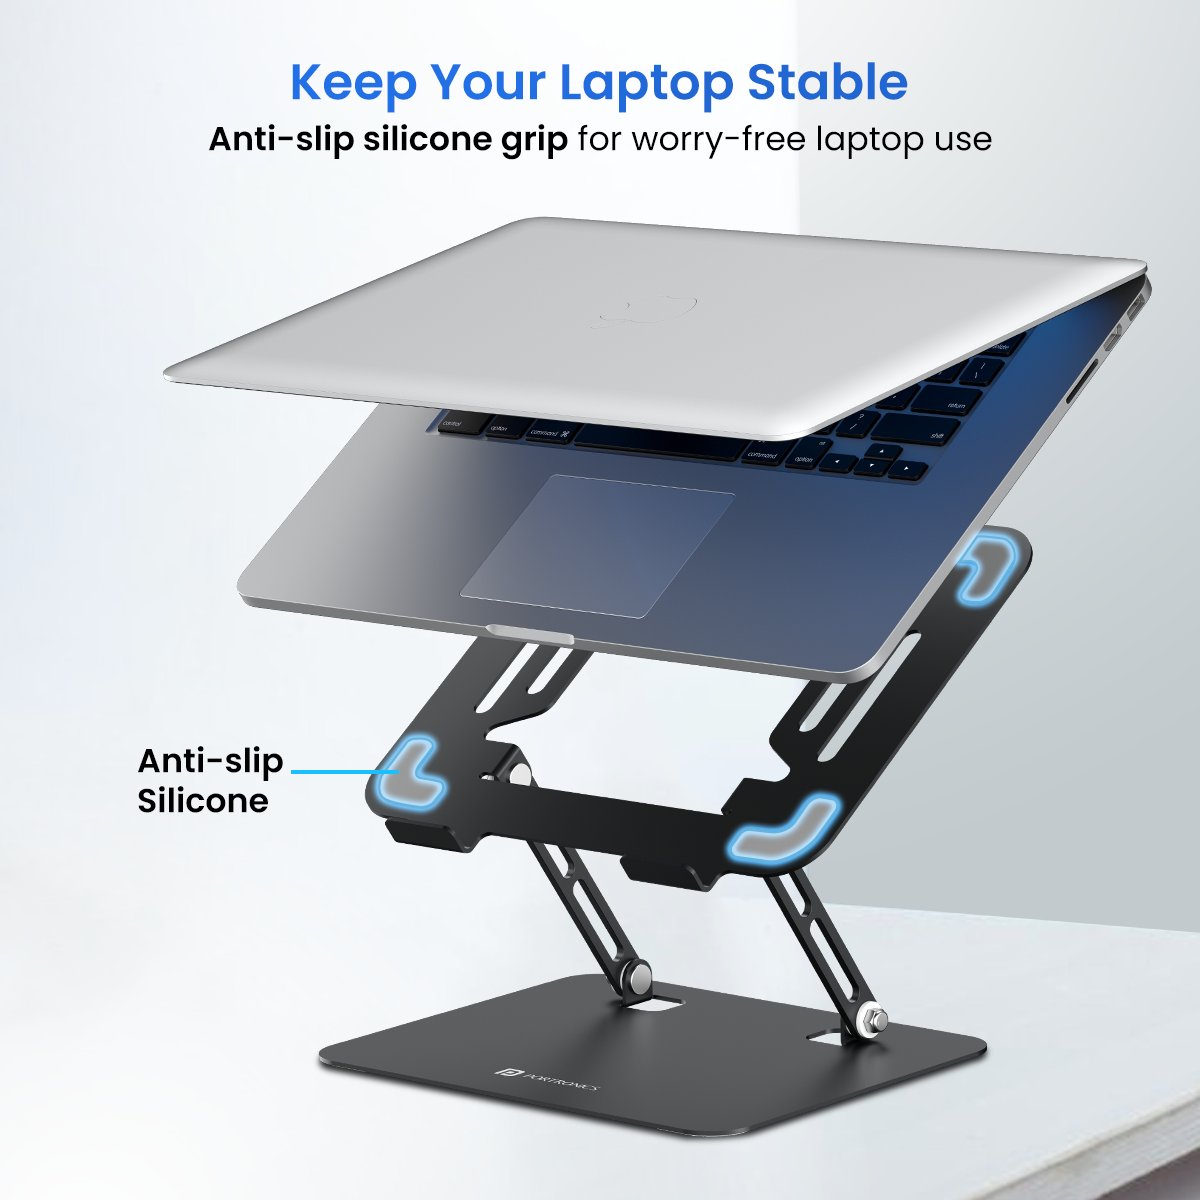 Black Portronics My Buddy K3 Pro laptop stand comes with anti slip silicone grip